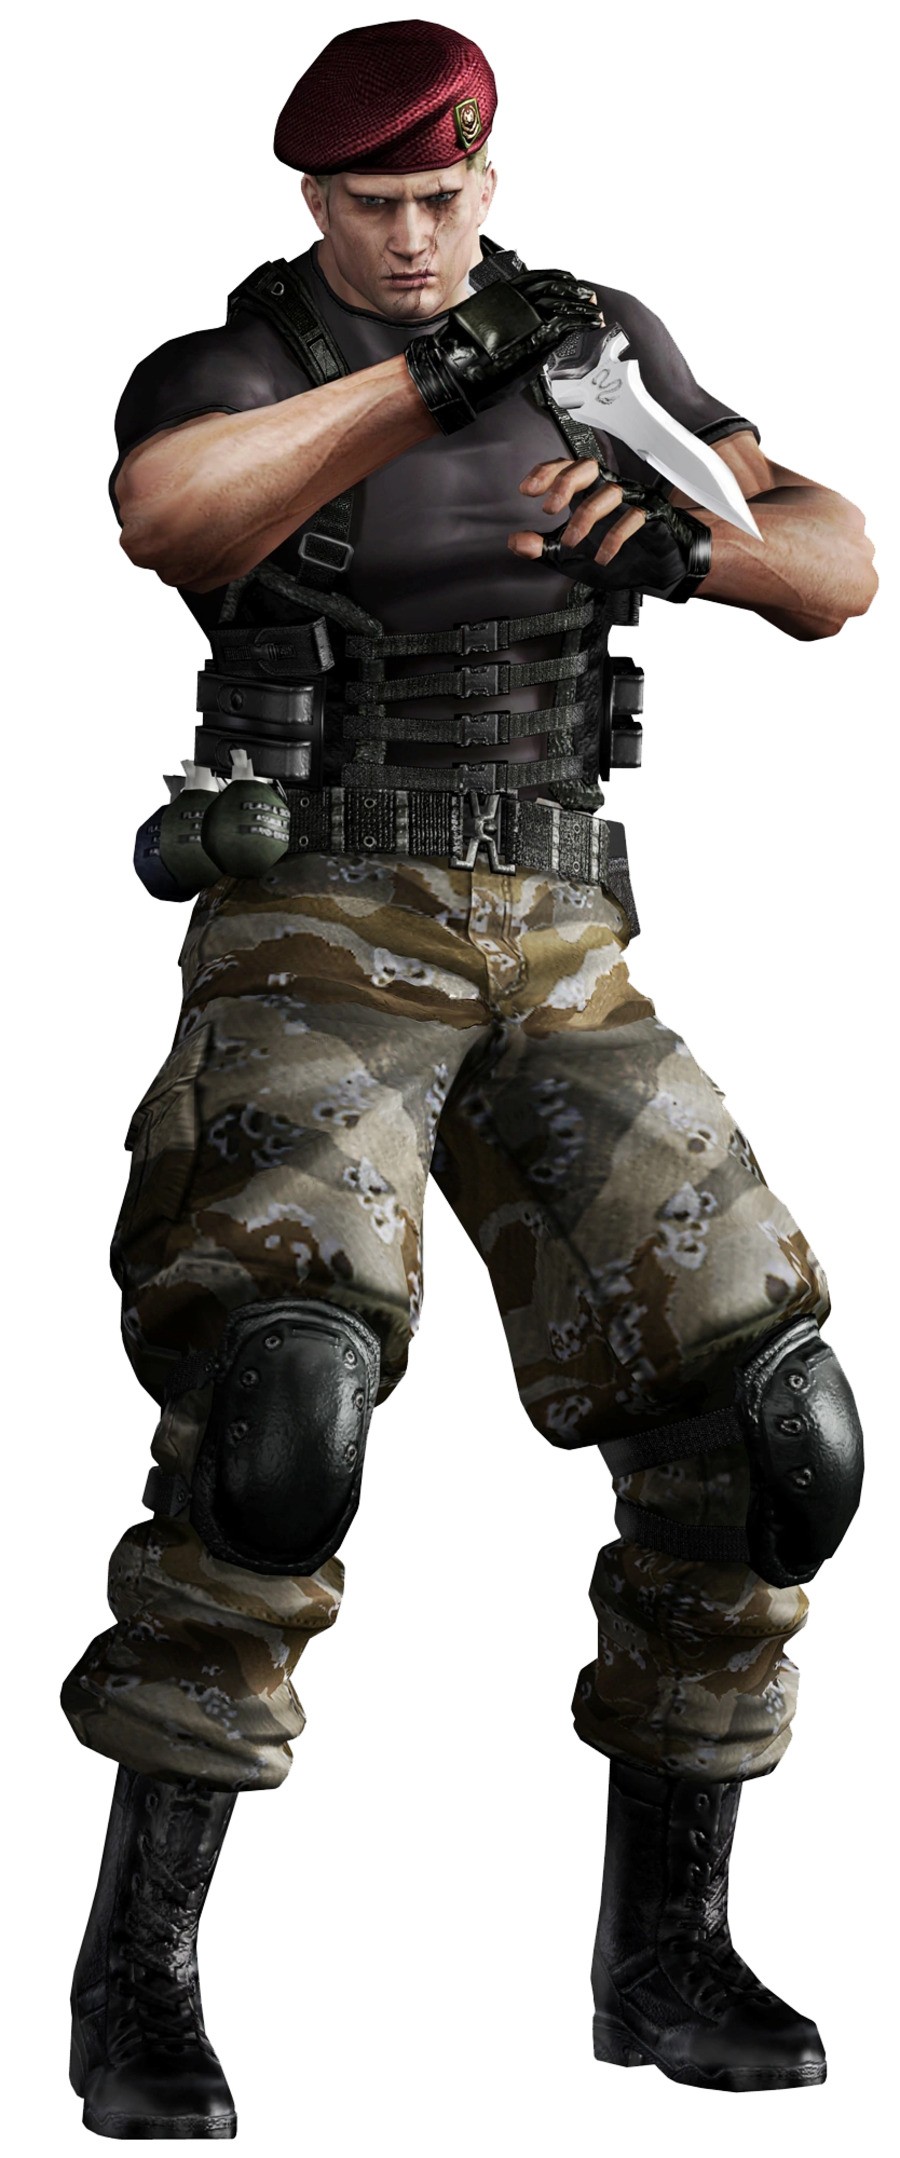 Who is this character from the Resident Evil series (pictured)?